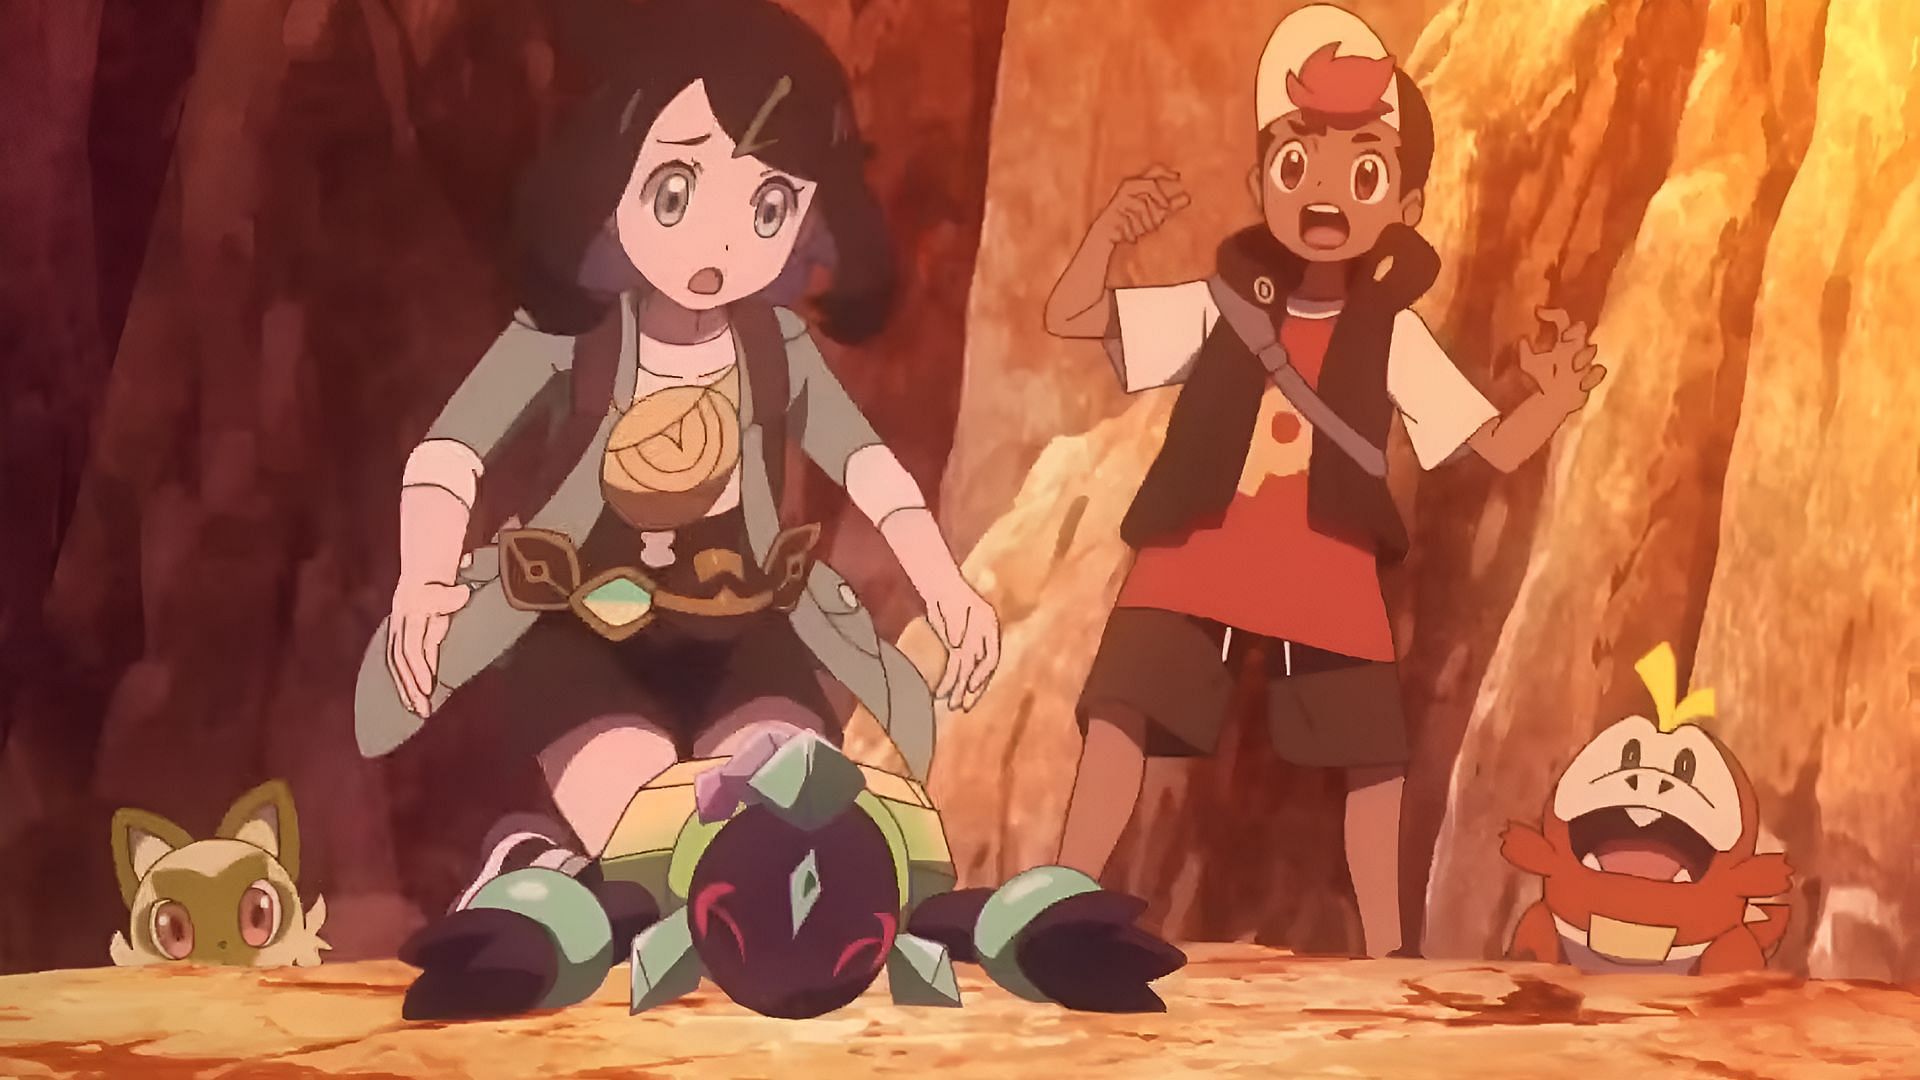 Terapagos passes out from exhaustion in Pokemon Horizons Episode 33 (Image via The Pokemon Company)